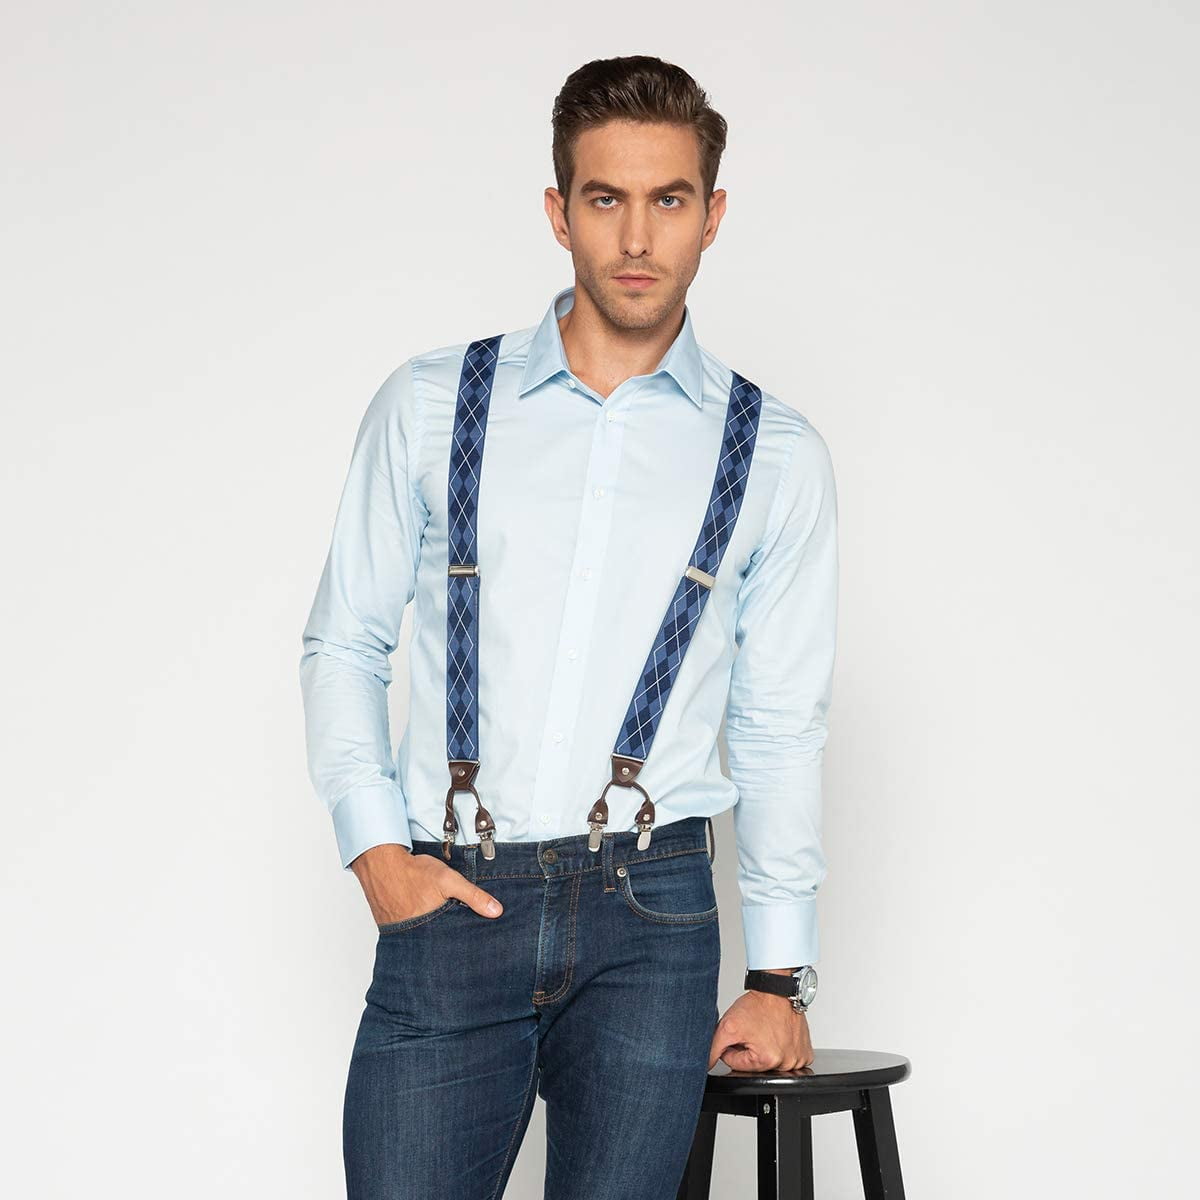 Y Back Mens Suspenders with 6 Strong Clips Wide Adjustable Elastic Braces for Casual&Fomal by Grade Code 